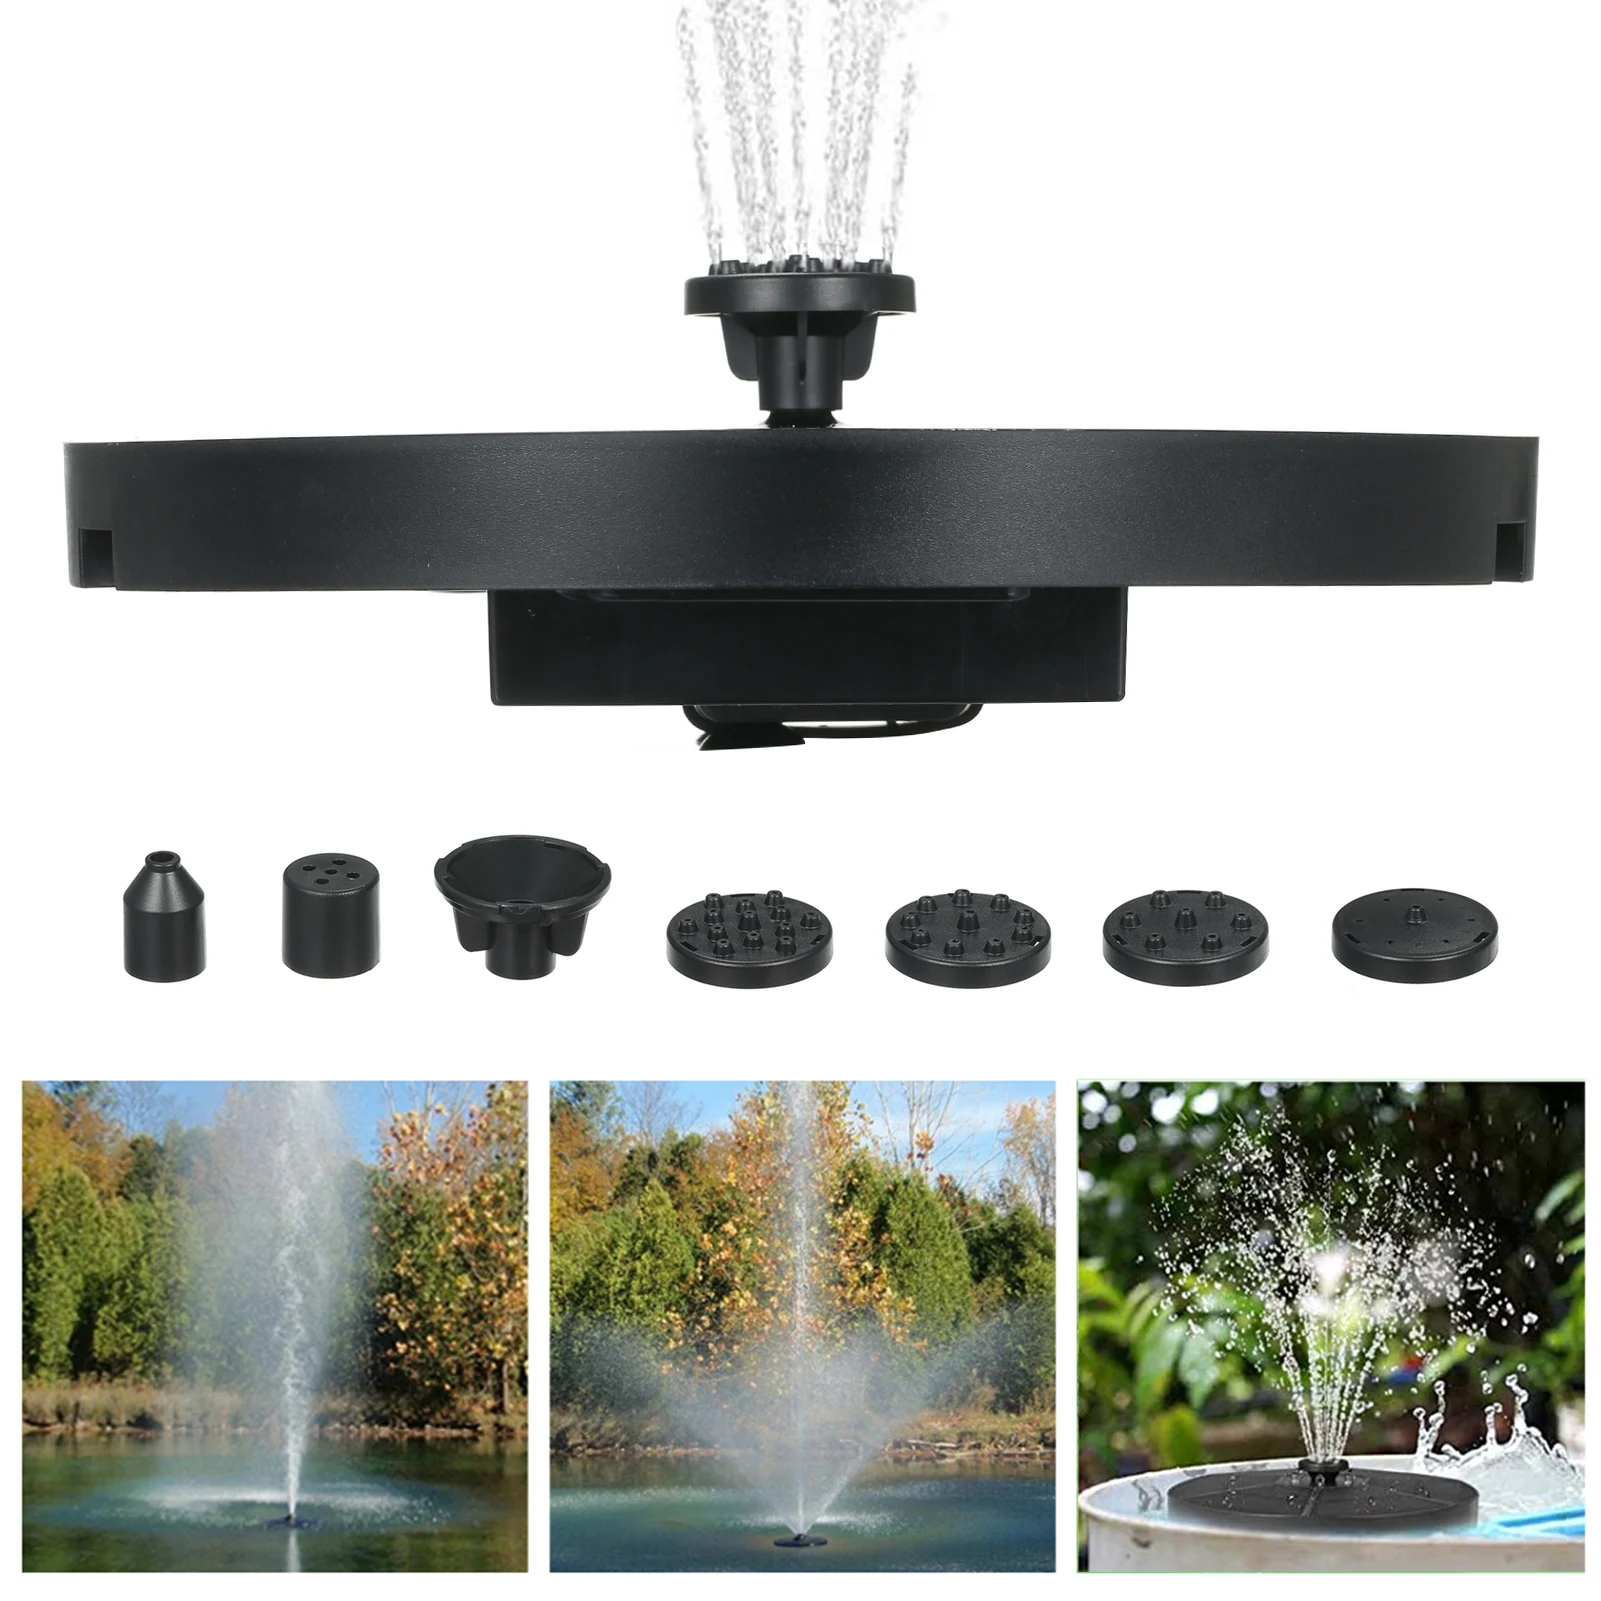 

4.7V/3.8W Solar Water Fountain Pump Colorful LED Lights Floating Garden Fountain Pump Swimming Pools Pond Lawn Decor